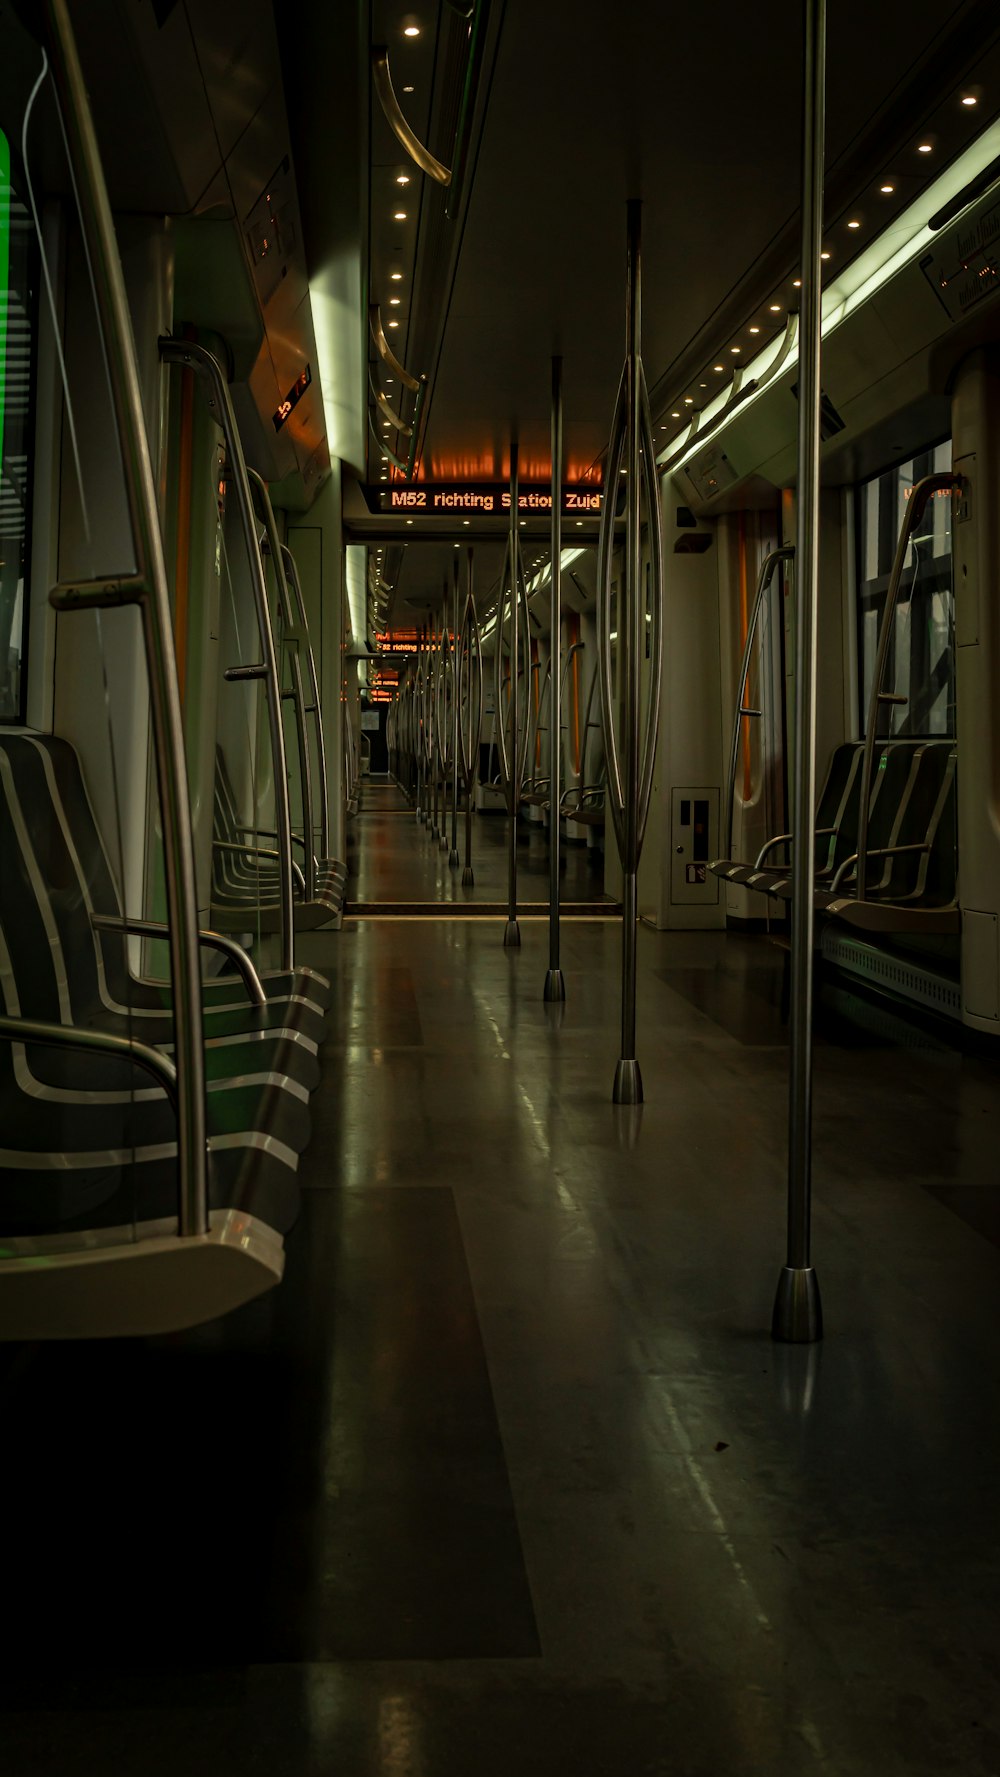 a dimly lit subway car with empty seats